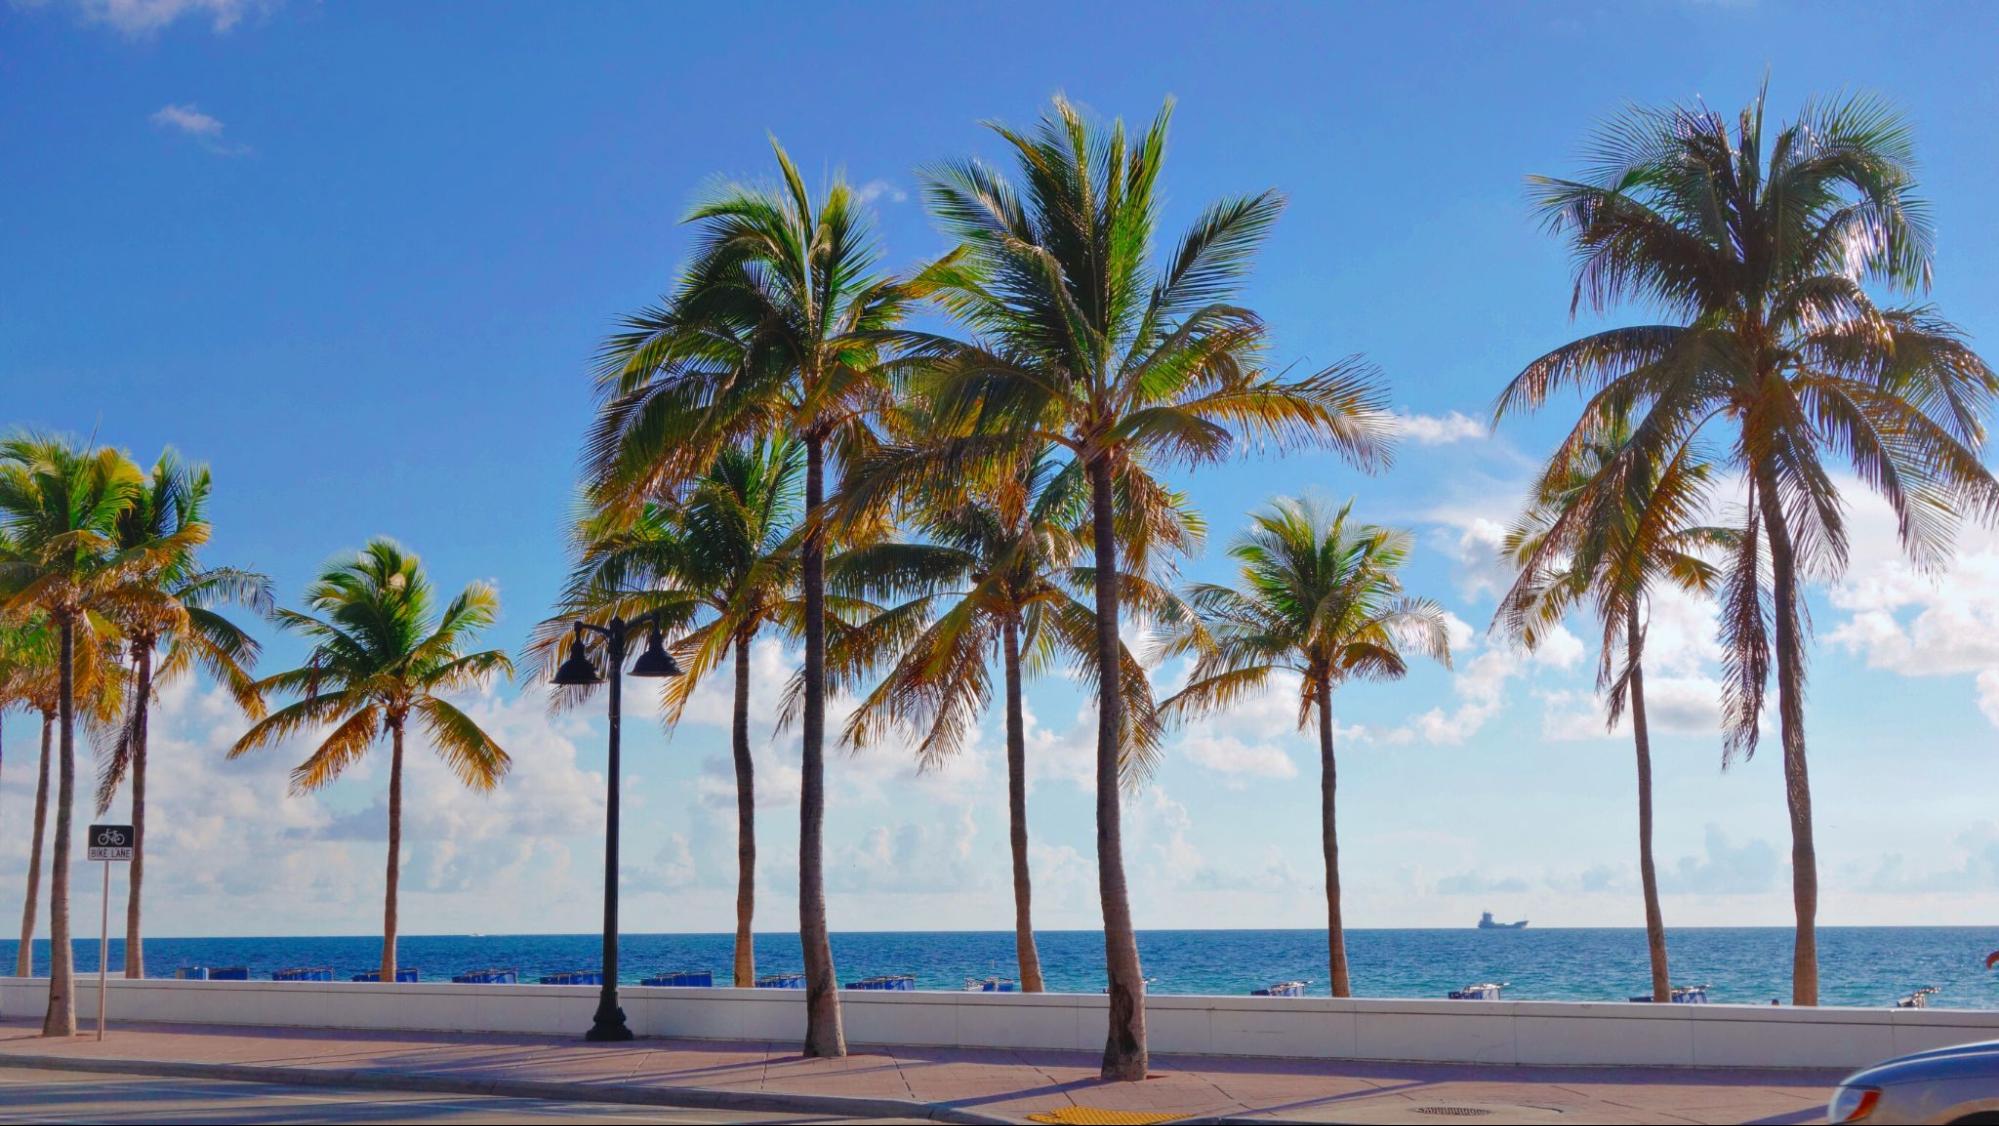 Our Guide to the Best Neighborhoods in Fort Lauderdale